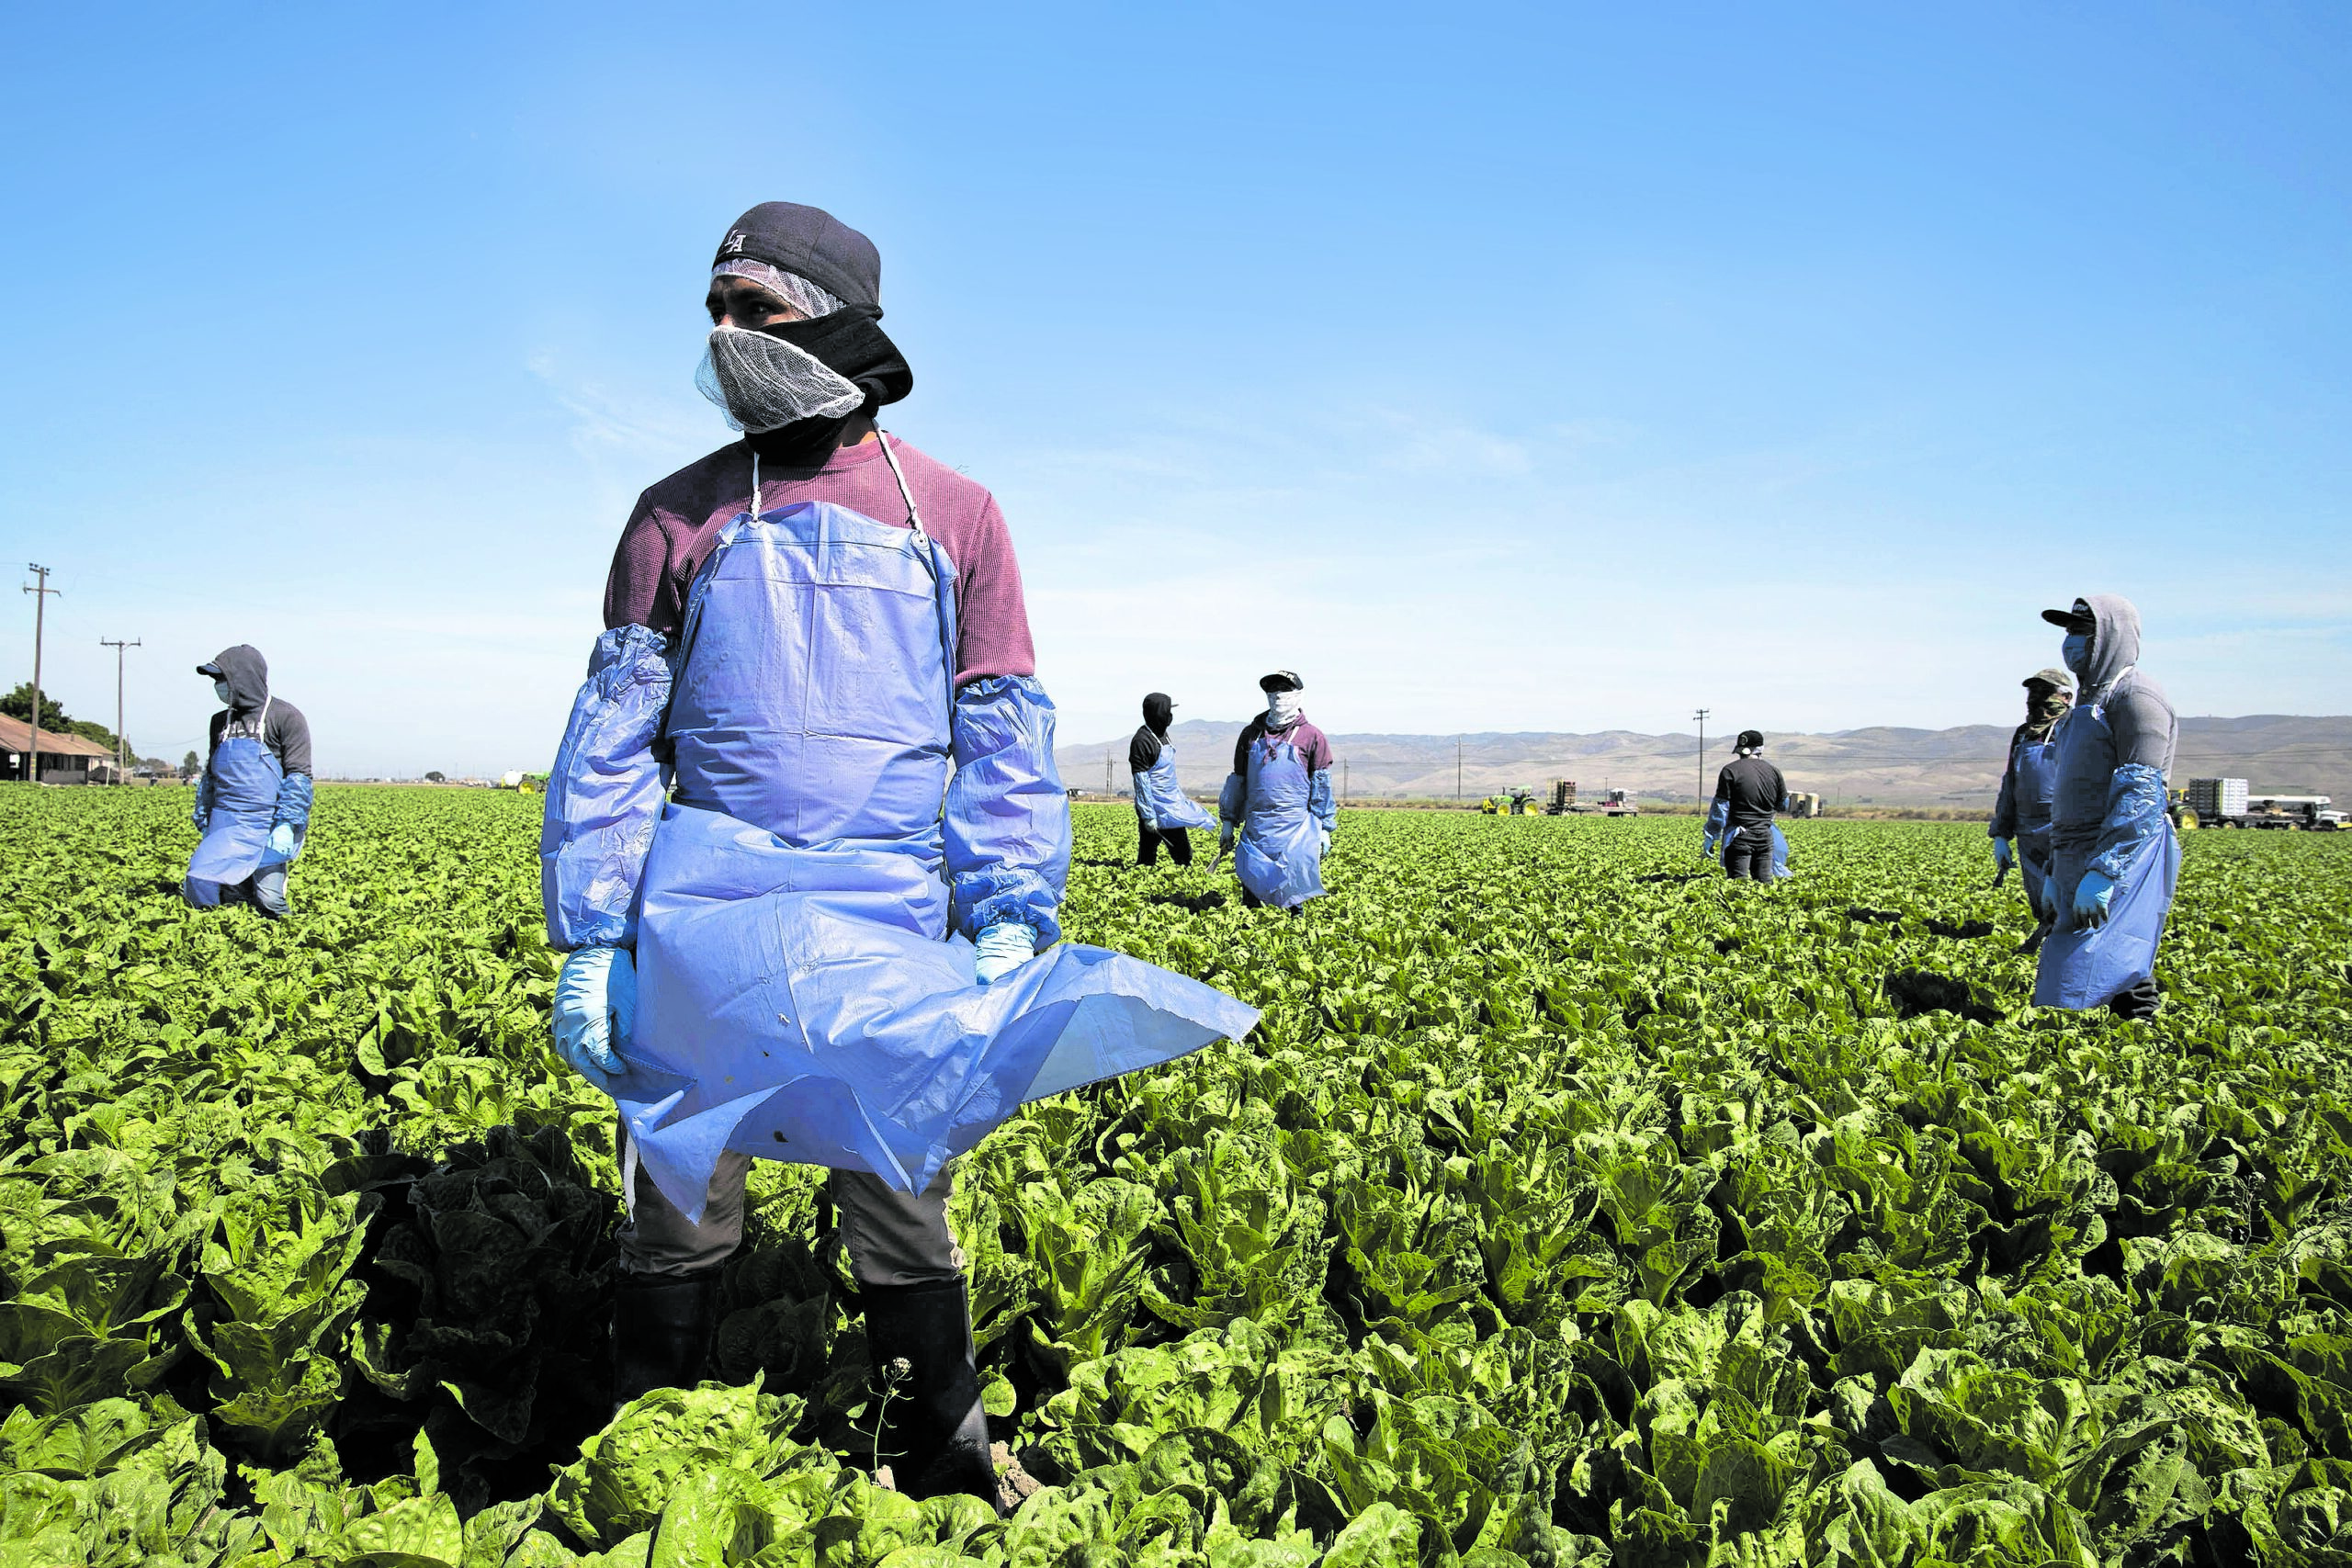 Soil and trials South Africans embroiled in US farm worker visa debate